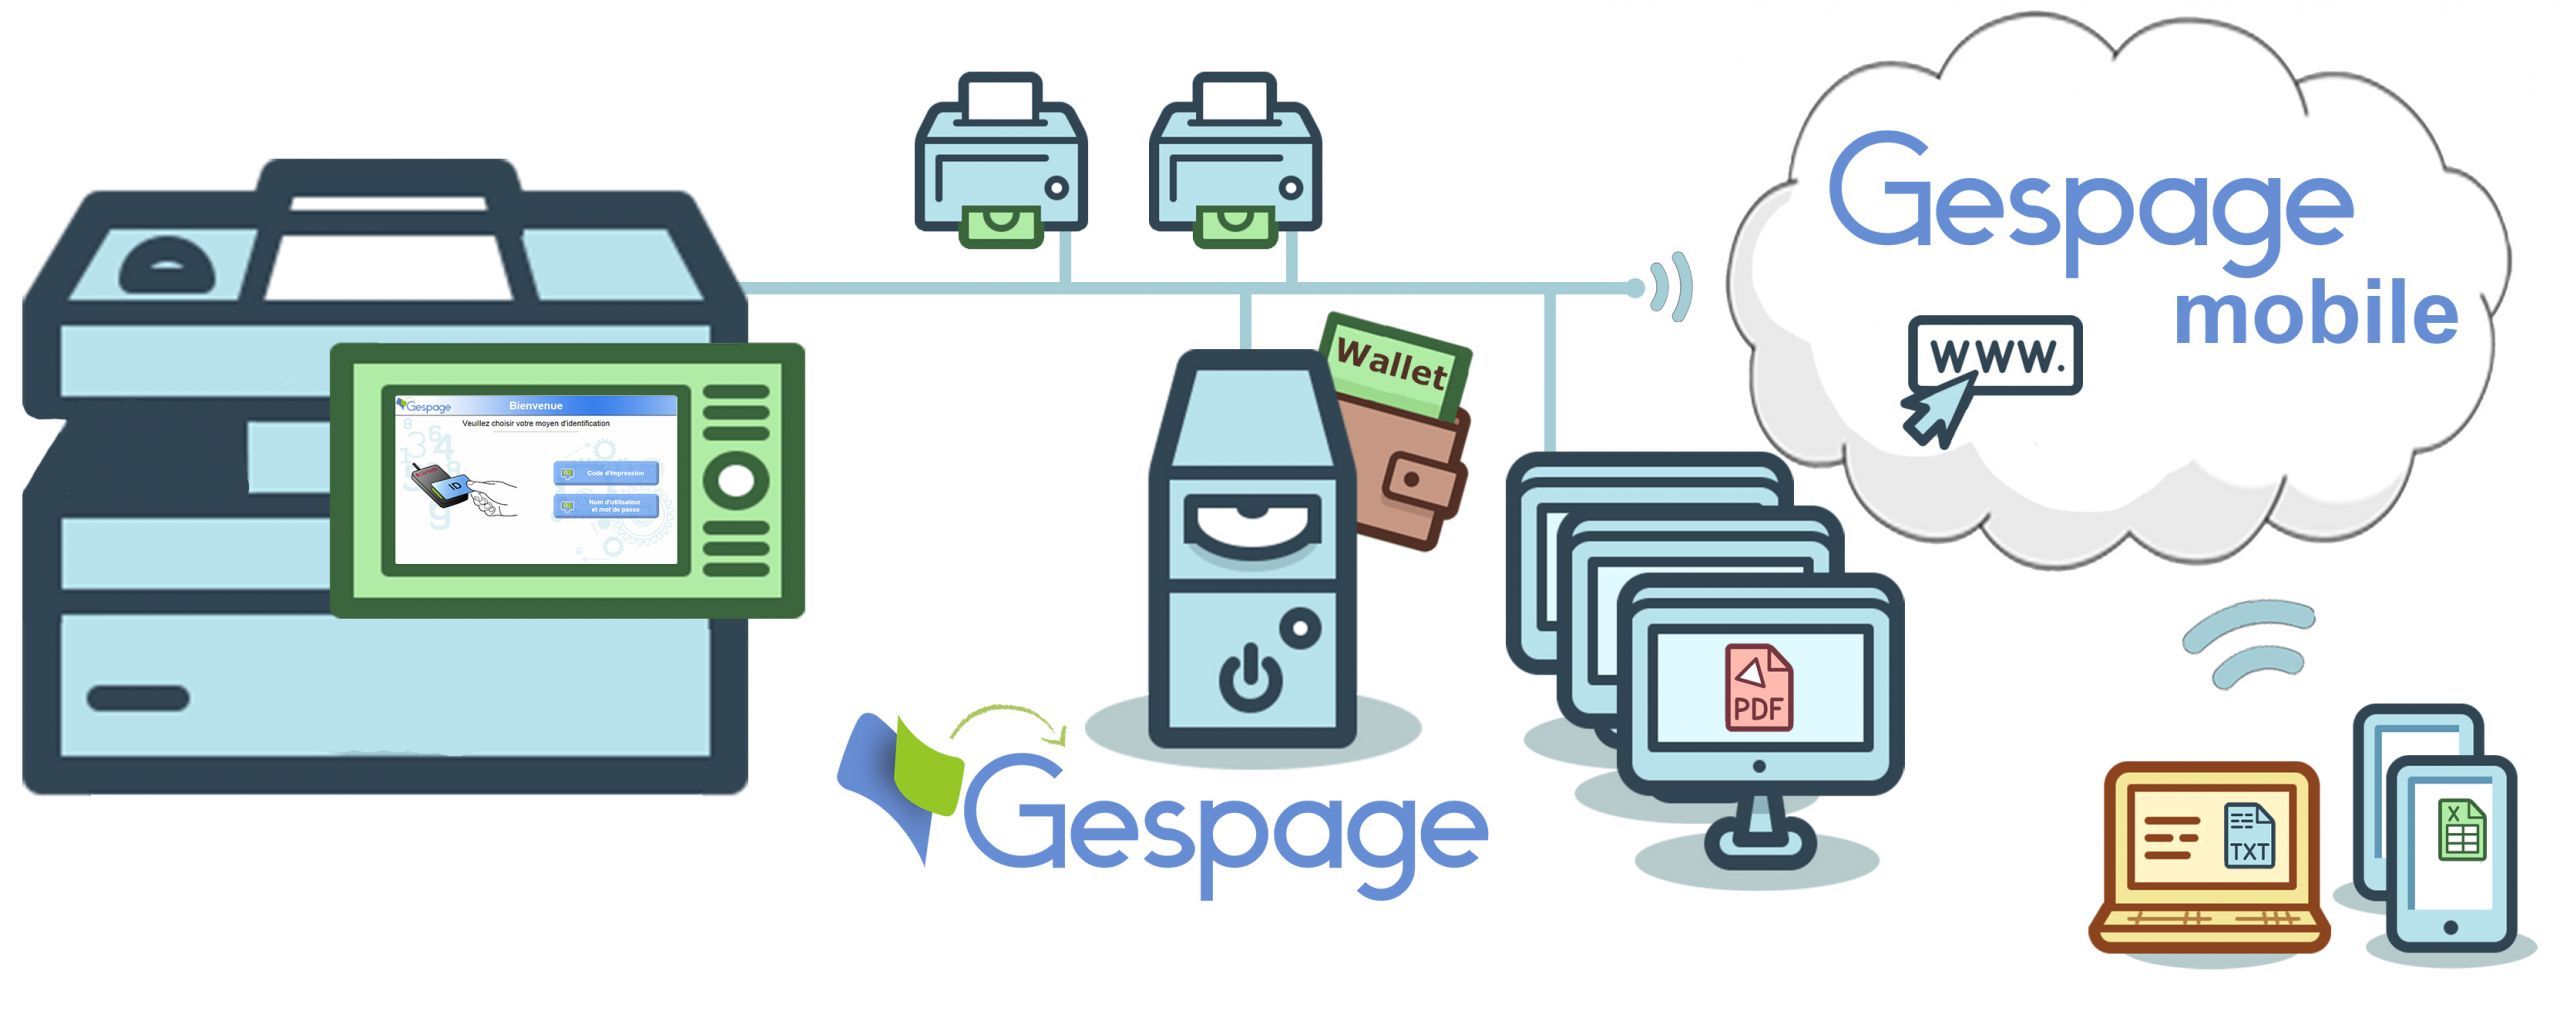 Gespage Software on the Toshiba eTerminal 4 • Gespage